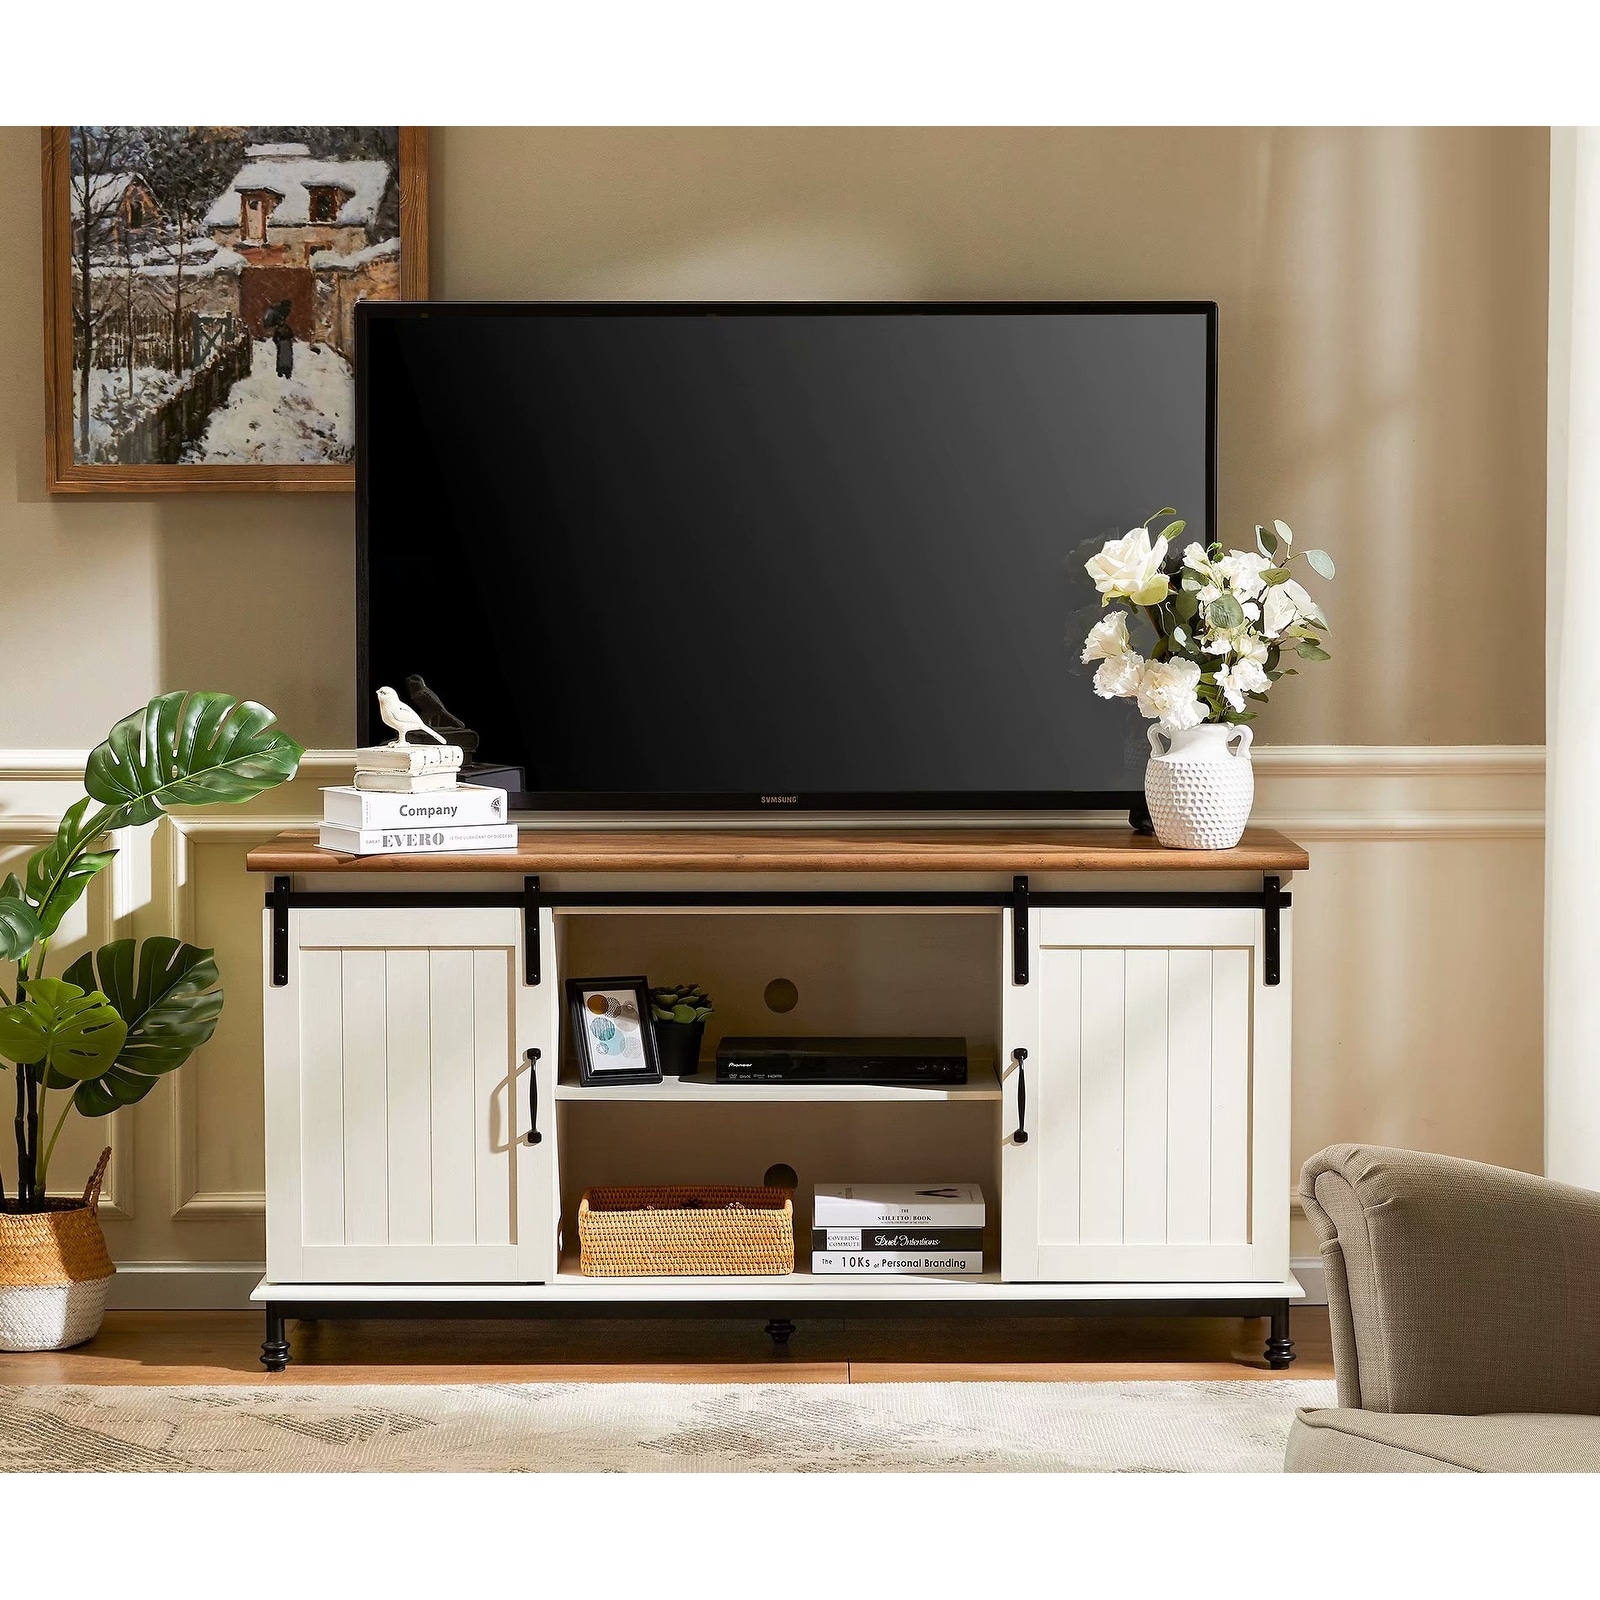 Details about   58"Farmhouse TV Stand W/Sliding Door Console Table For TVs Up To 65" Rustic Oak 